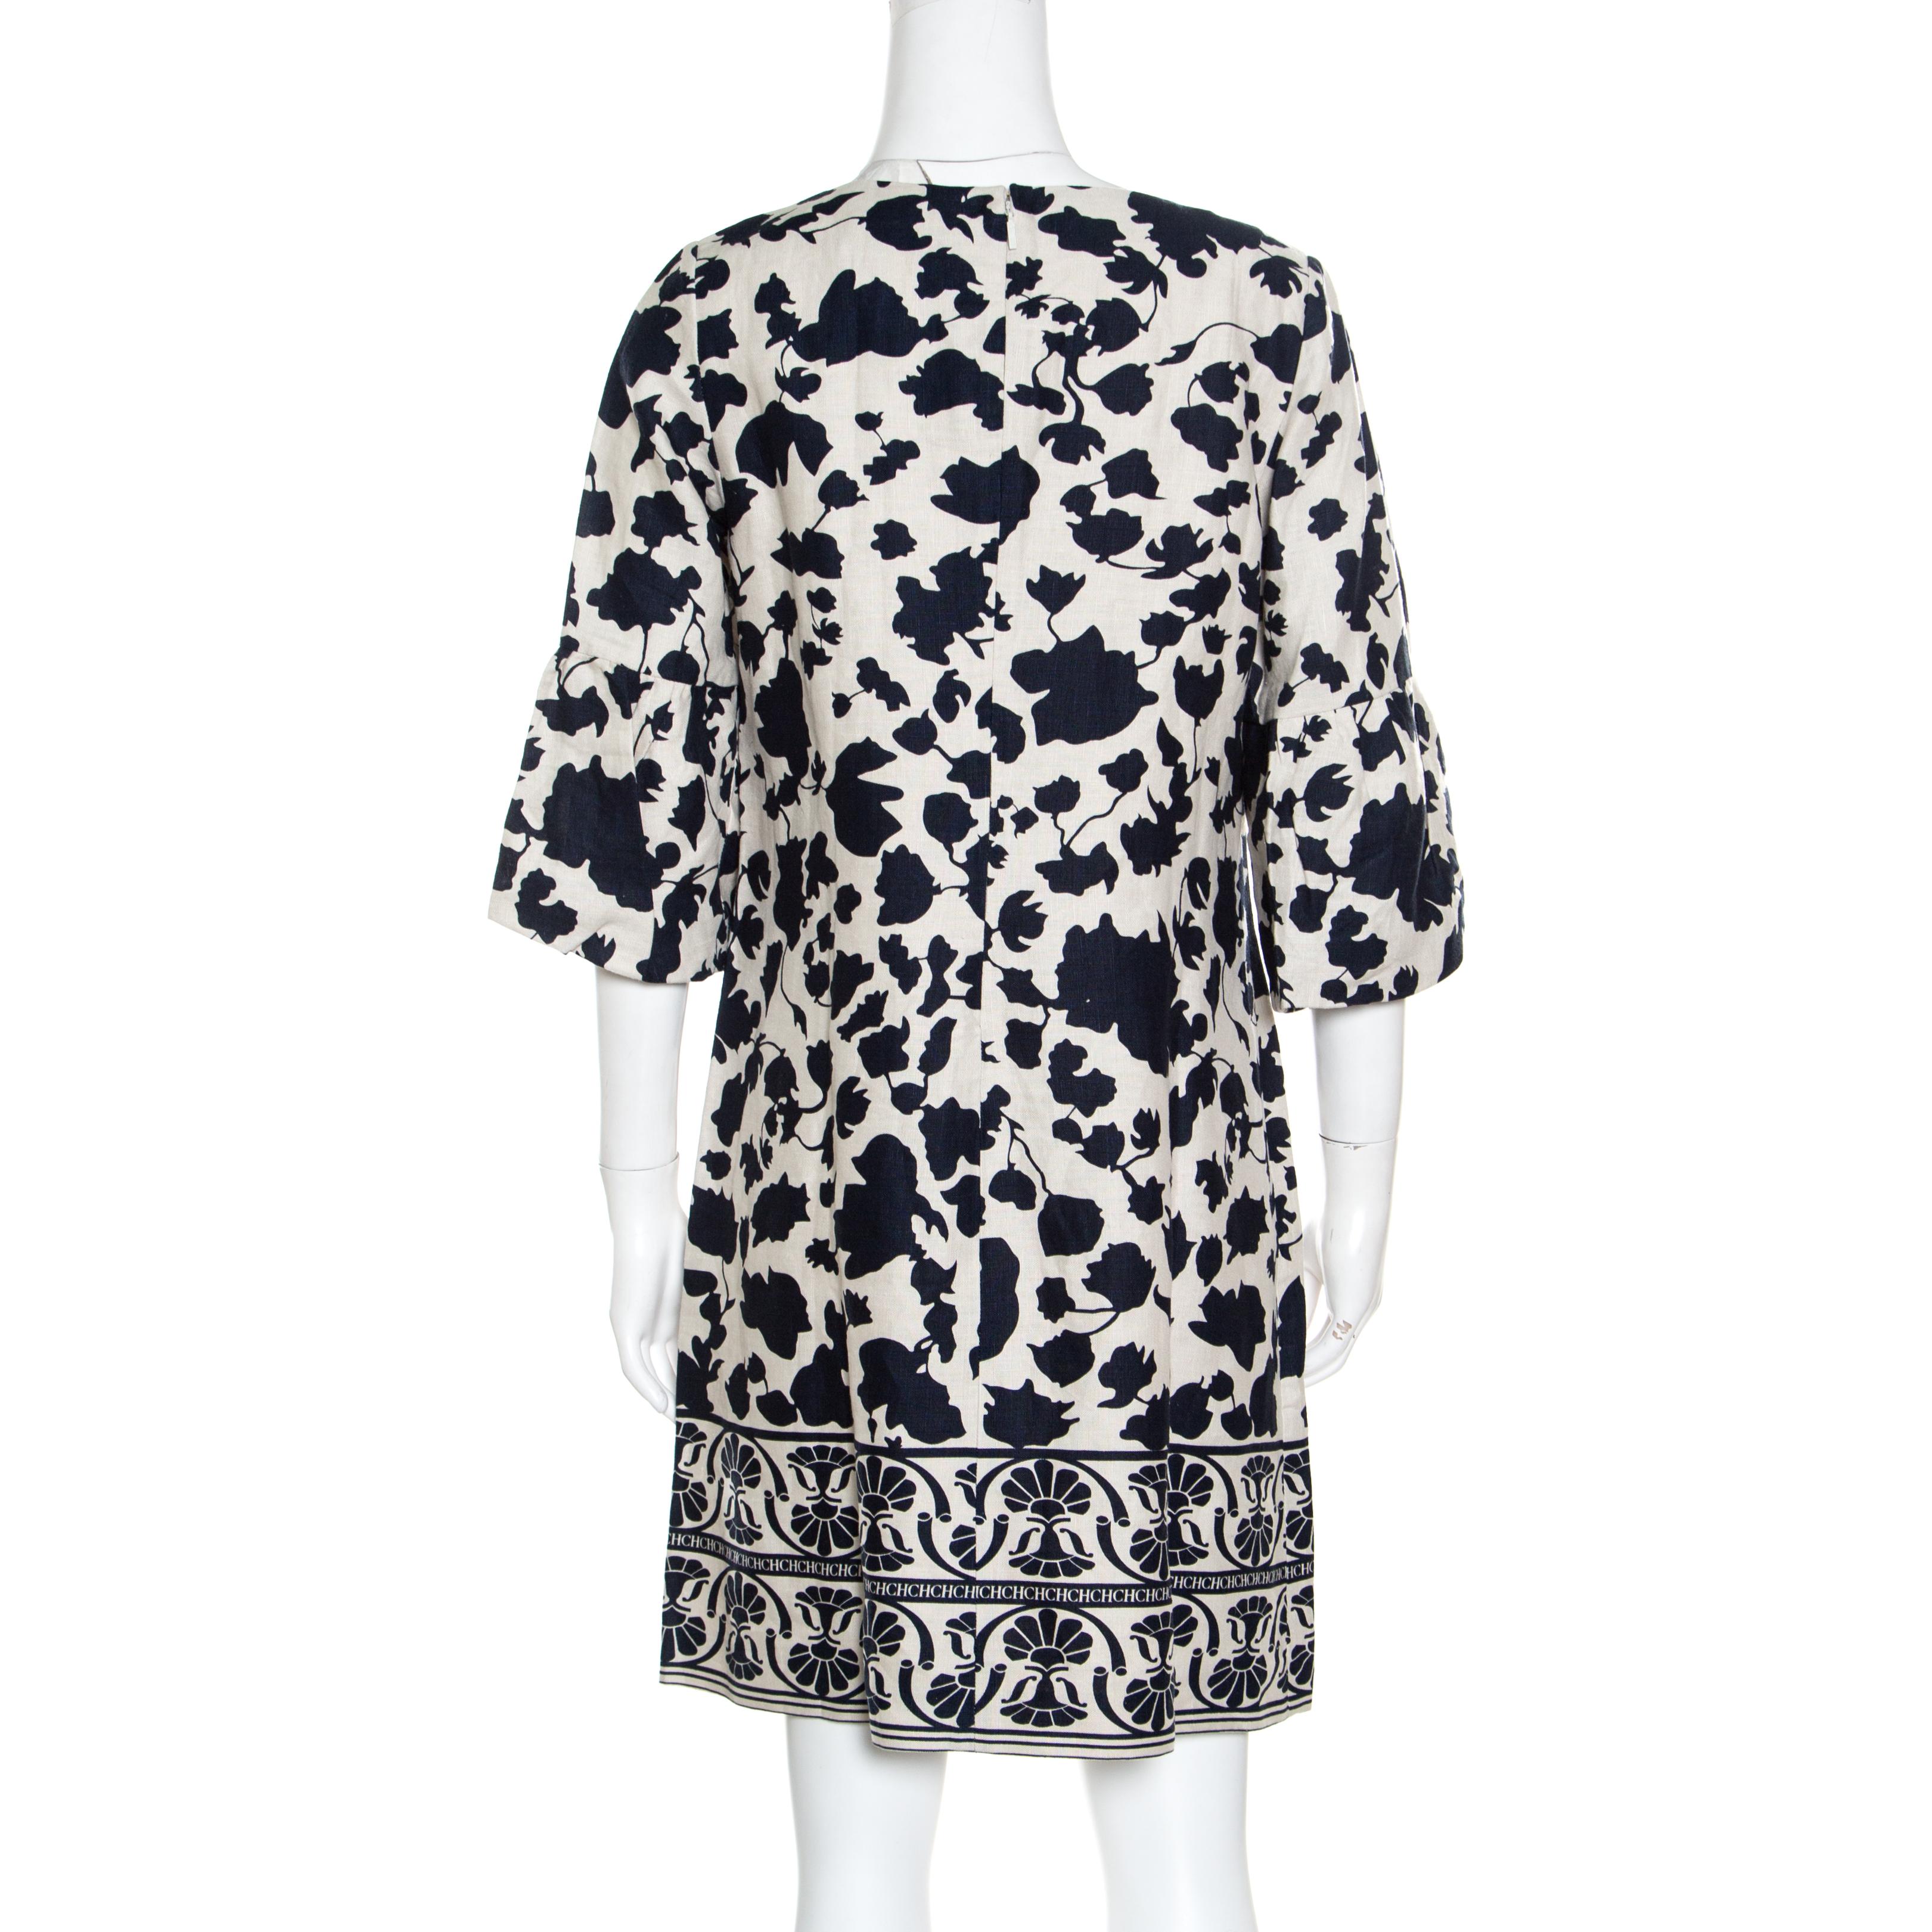 Adding a beautiful, chic touch to your casual daytime summer collection, this beautiful CH Carolina Herrera tunic dress is sure to become a summer staple. Constructed in blue and cream floral printed linen fabric, this dress features a simple round